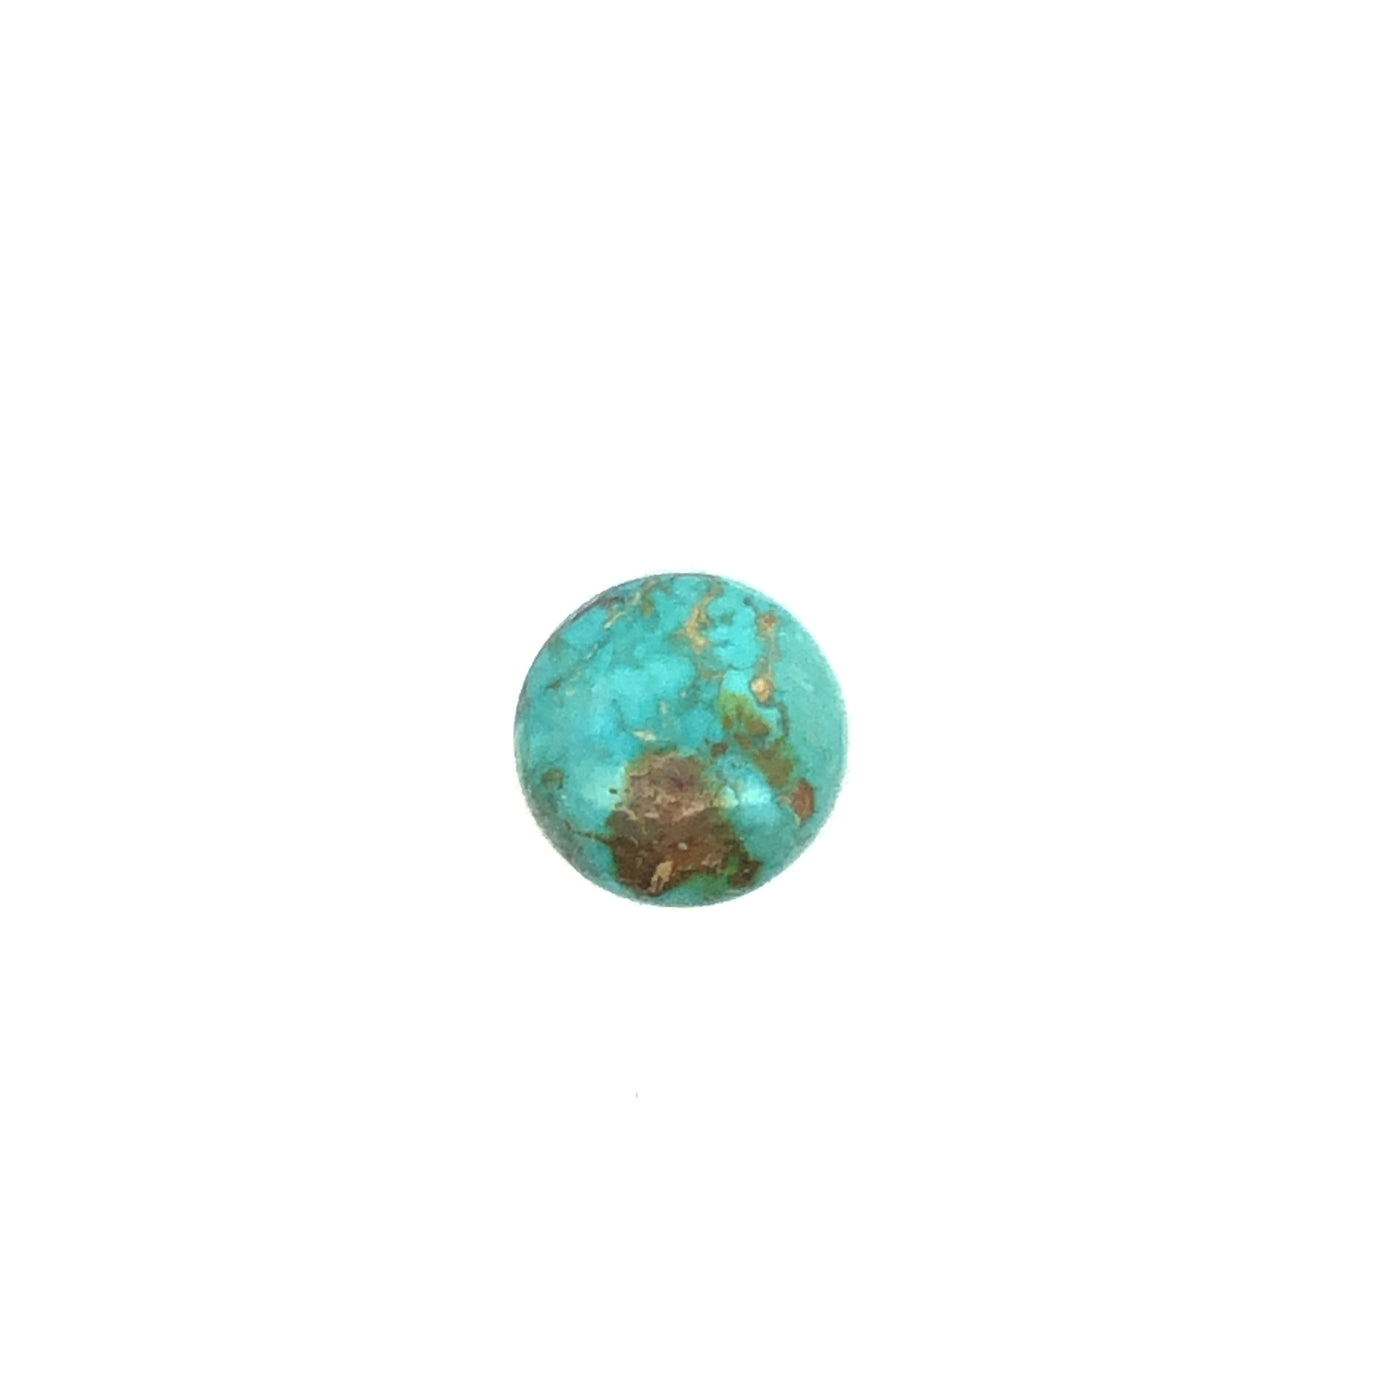 Loose Narooma Turquoise Round Shaped 9.27Ct Blue With Some Brown